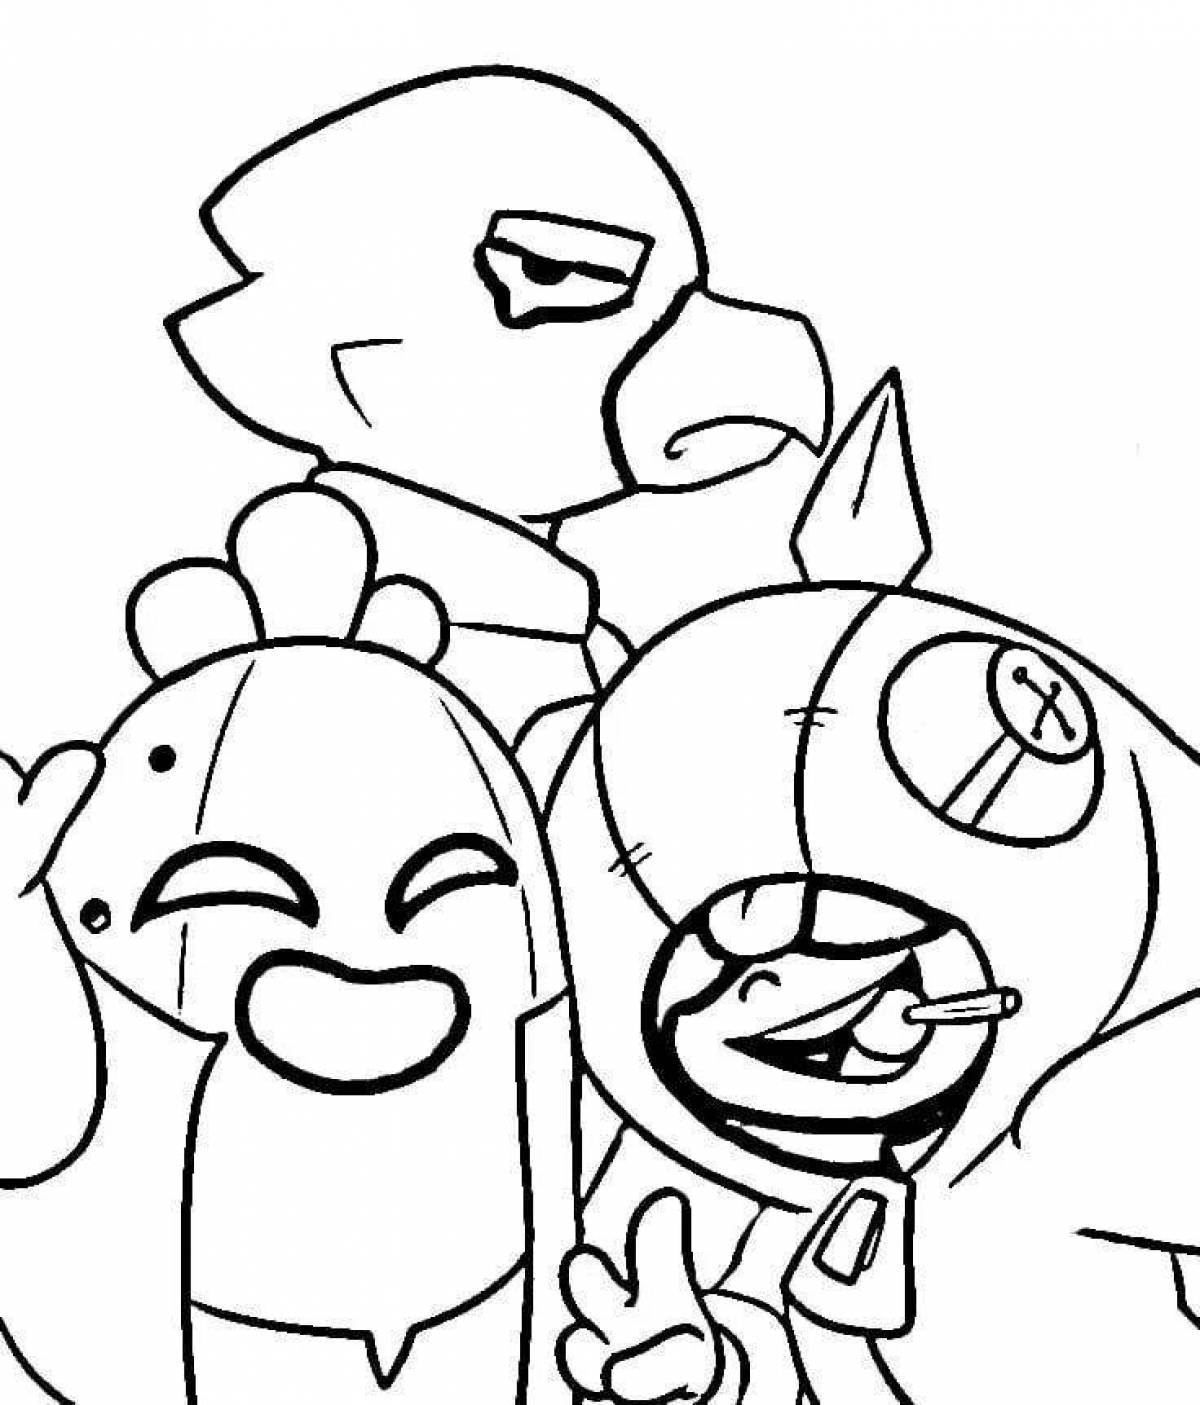 The incredible leon brawl stars coloring page